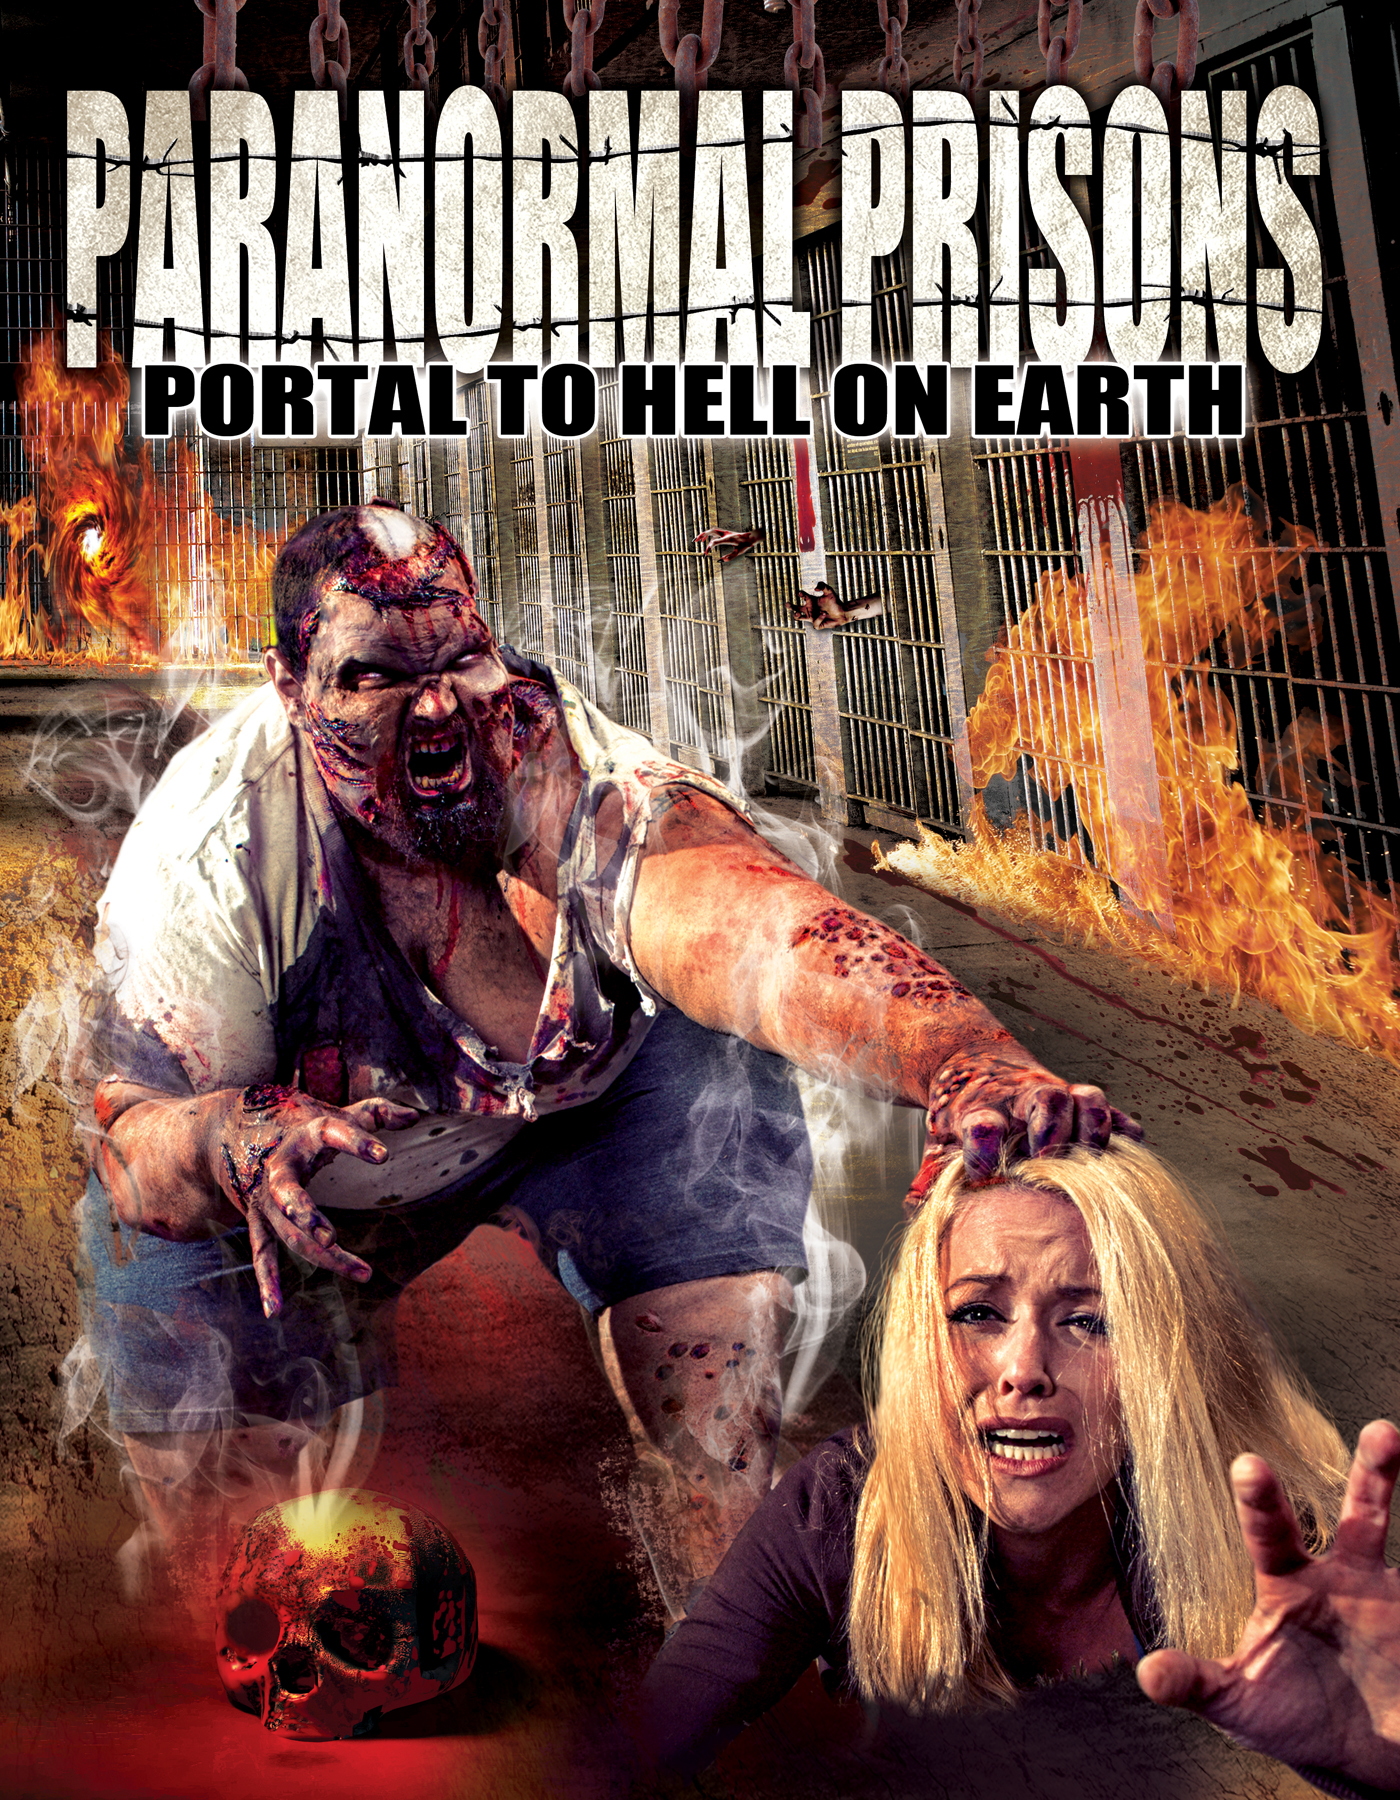 William Burke in Paranormal Prisons: Portal to Hell on Earth (2014)